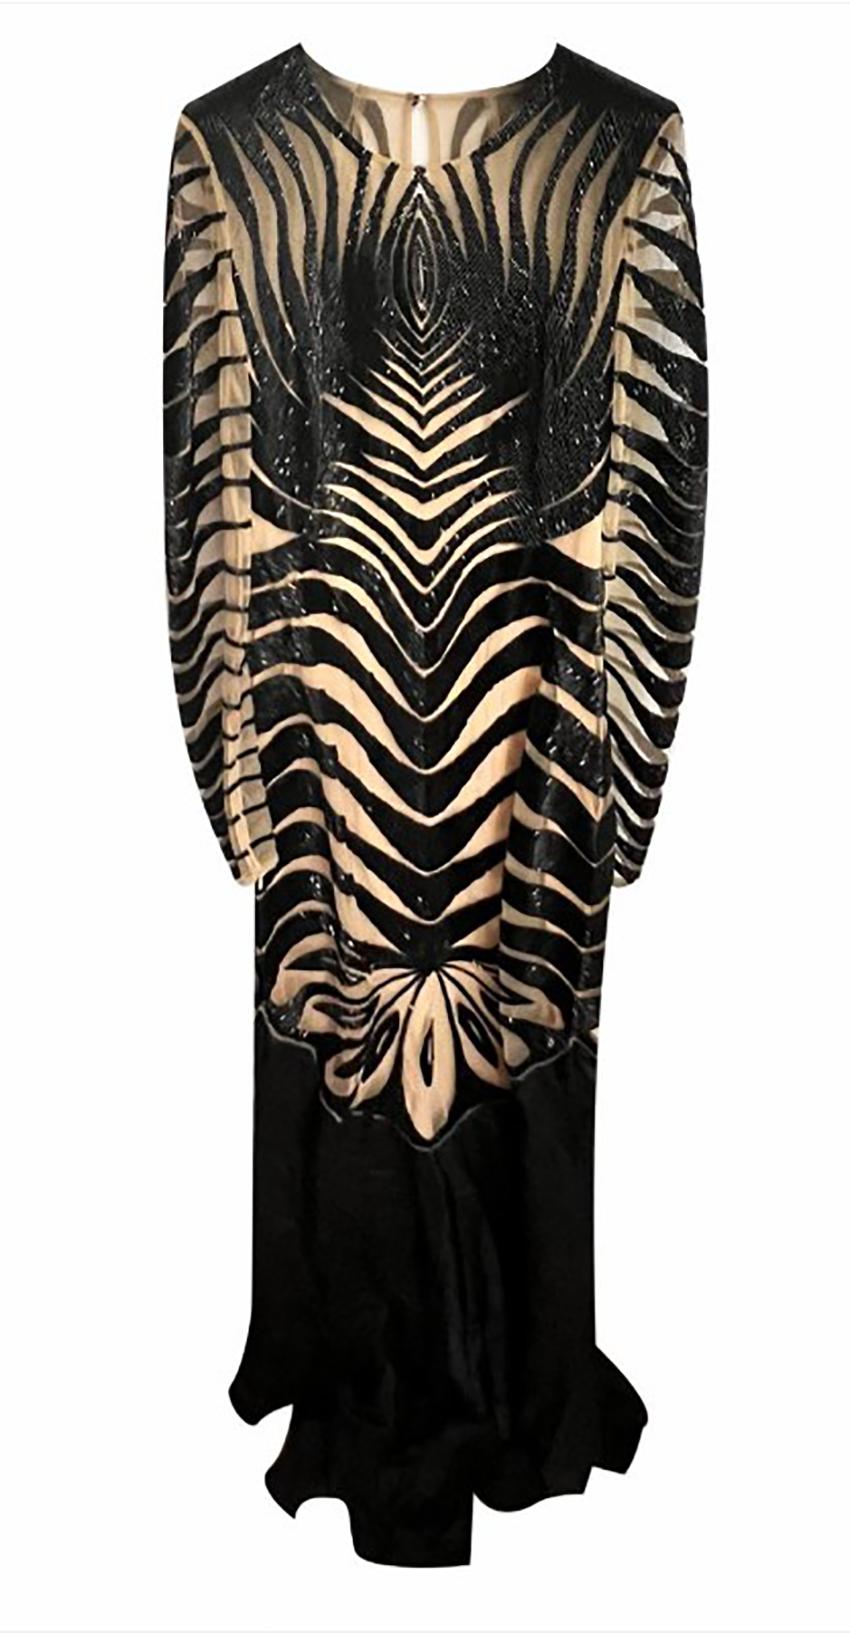 ZUHAIR MURAD

Incredible Black and Beige embellished  long dress with a train



Long sleeves

Will make the waist thin and silhouette prefect! 





Size:  EU 44



Pre-owned. Excellent condition. 
PLEASE VISIT OUR STORE FOR MORE GREAT ITEMS


os 
